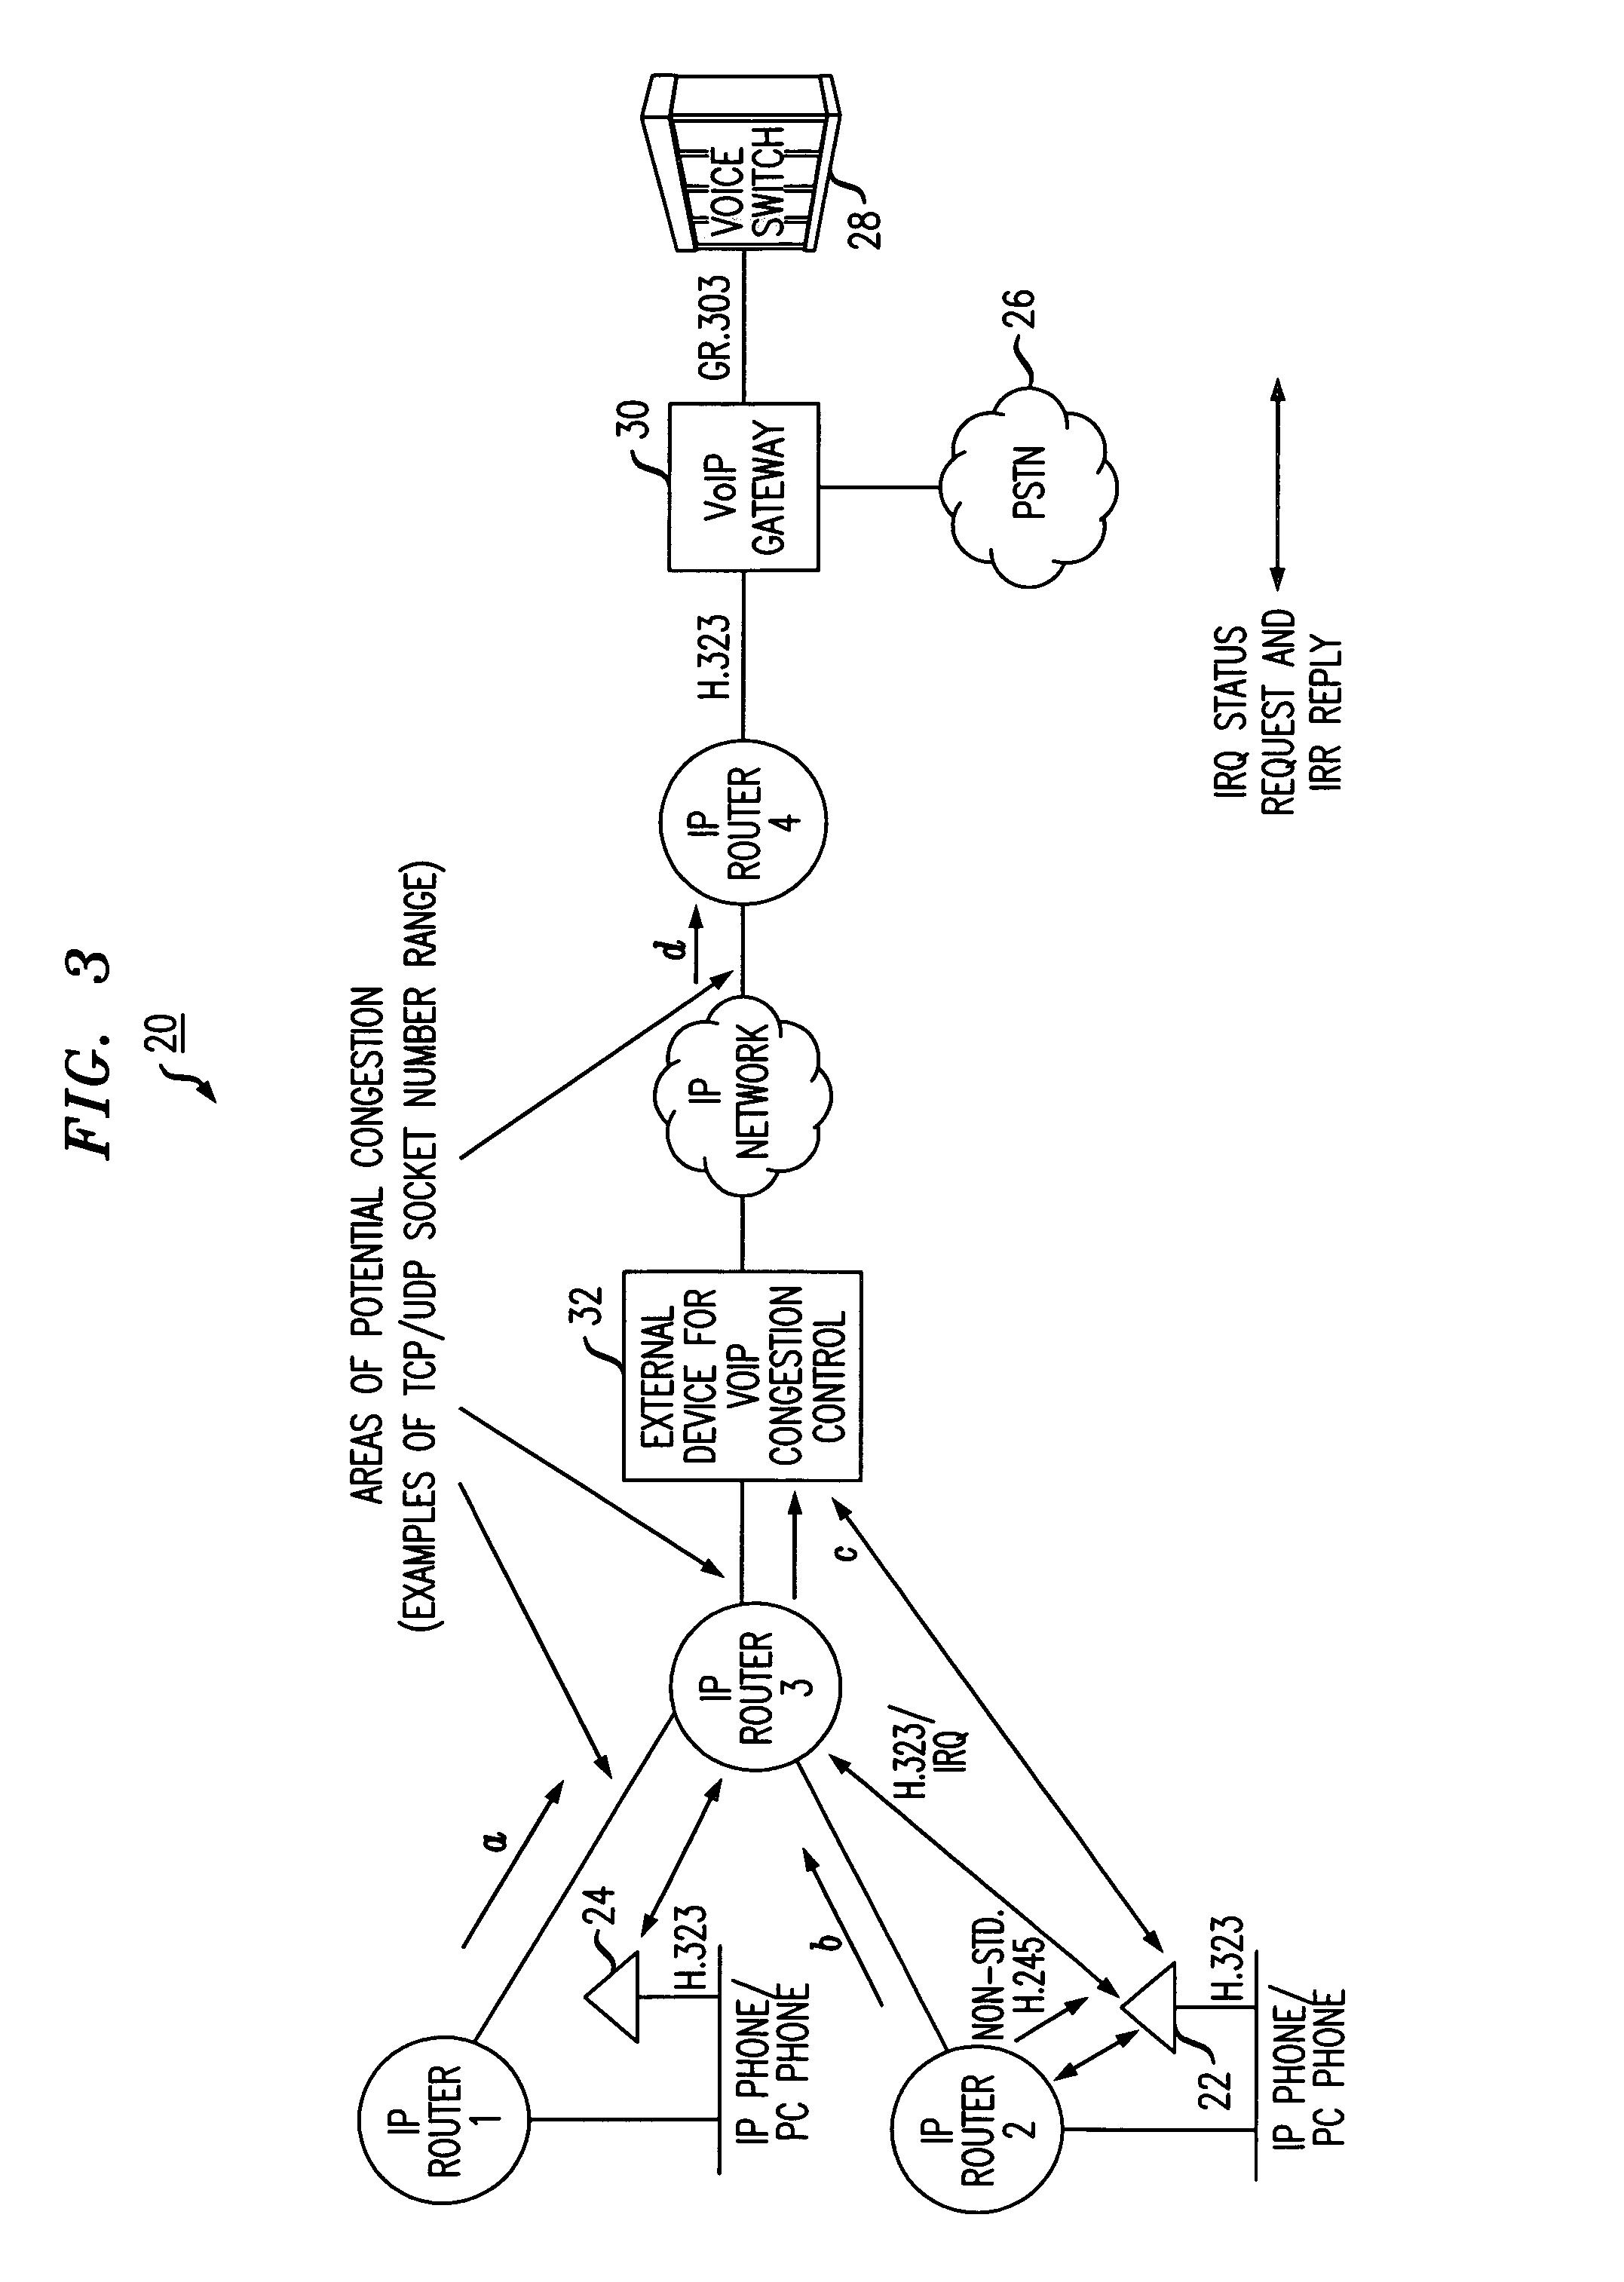 Method of providing quality of service (QOS) to voice applications in routed IP networks